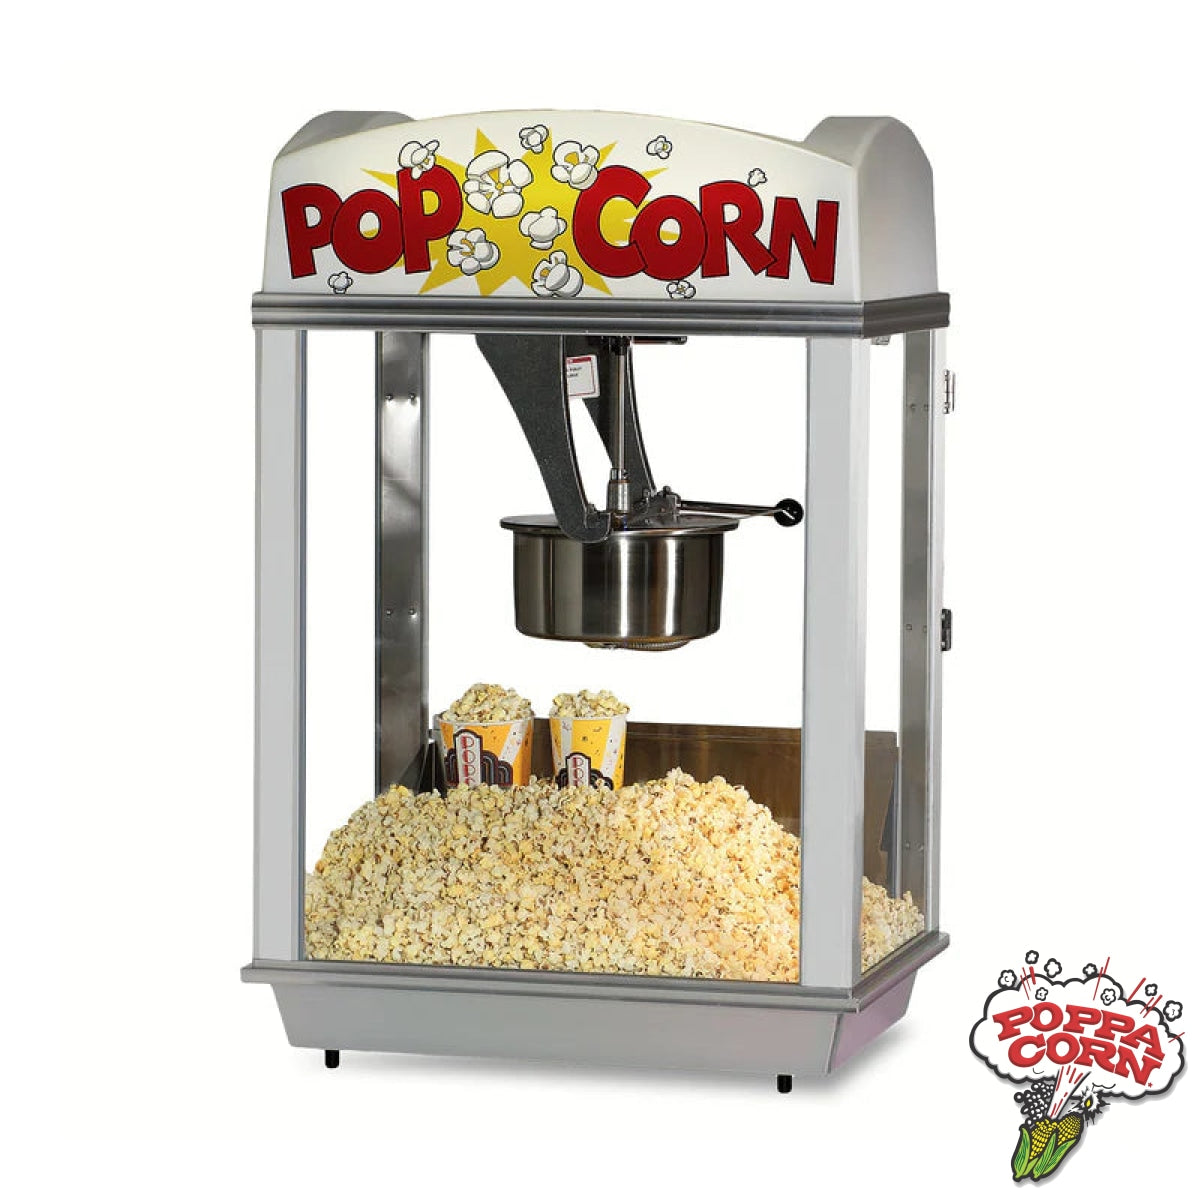 Whiz Bang Popcorn Machine - Lighted Sign and Forced-Air Popcorn Crisping System - GM2005 - Poppa Corn Corp